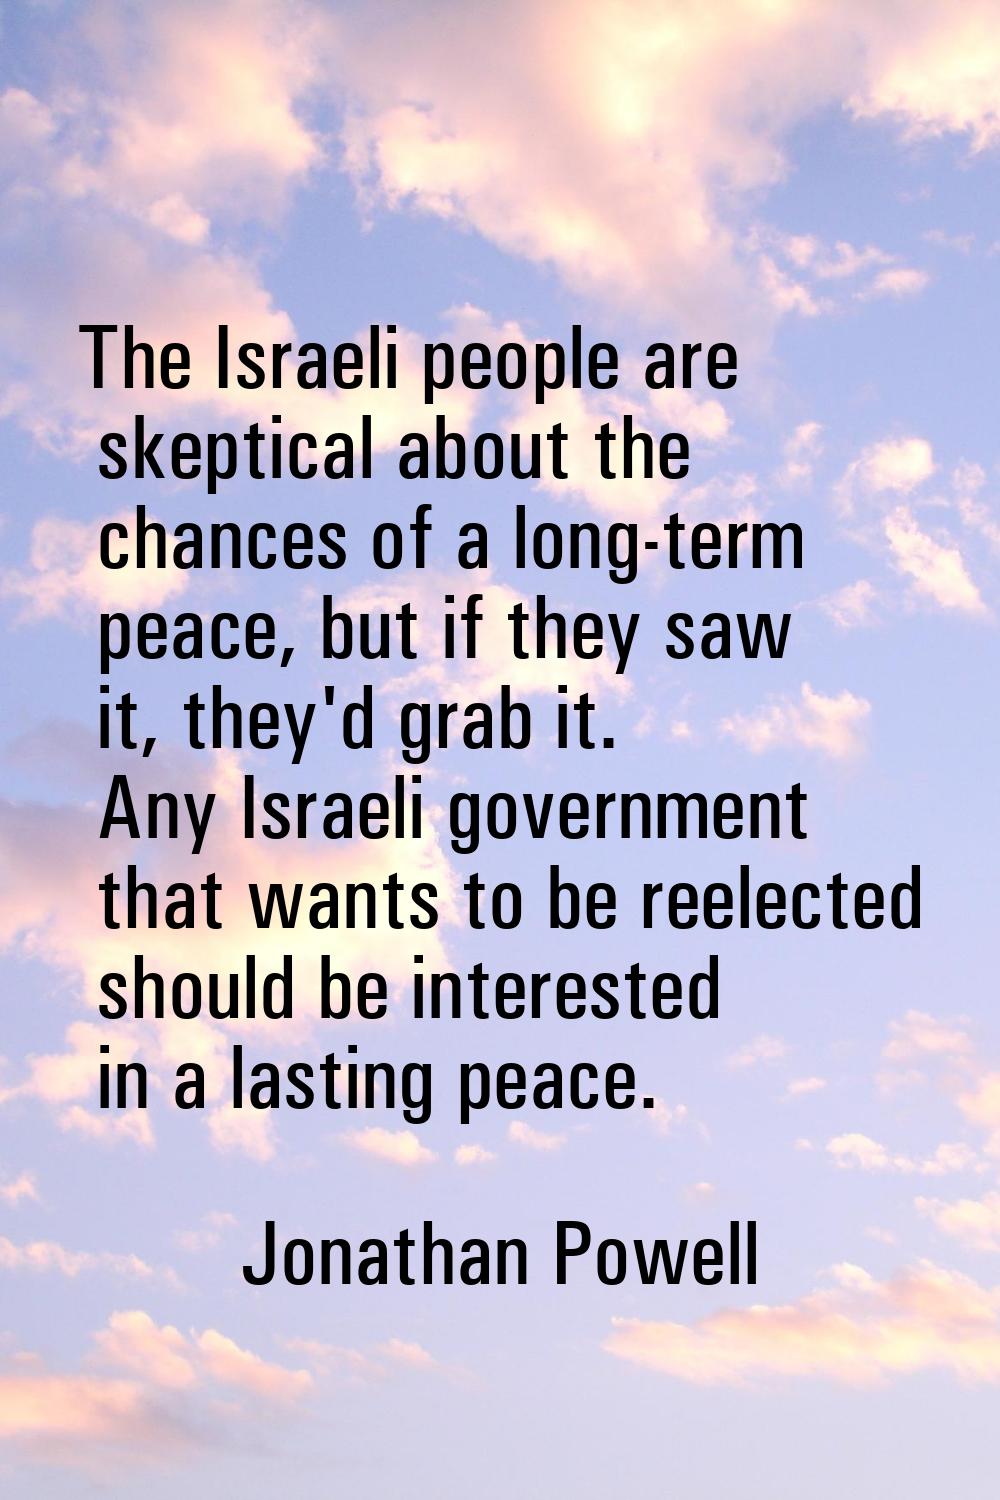 The Israeli people are skeptical about the chances of a long-term peace, but if they saw it, they'd